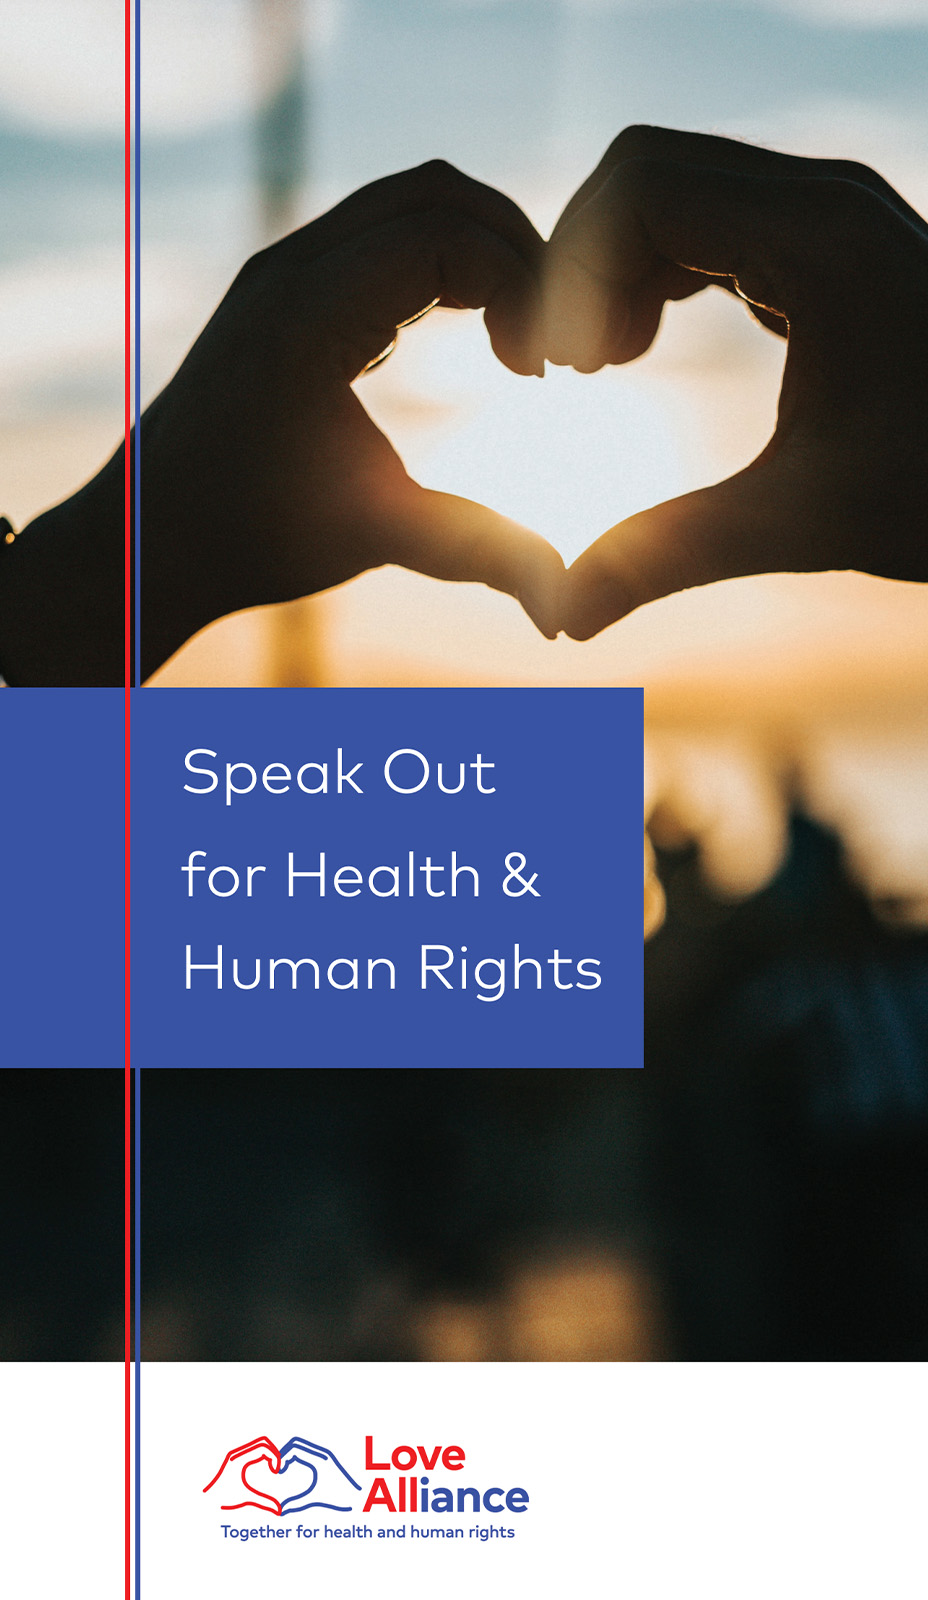 Love Alliance Global Advocacy Strategy Speak out for Health Human Rights v2